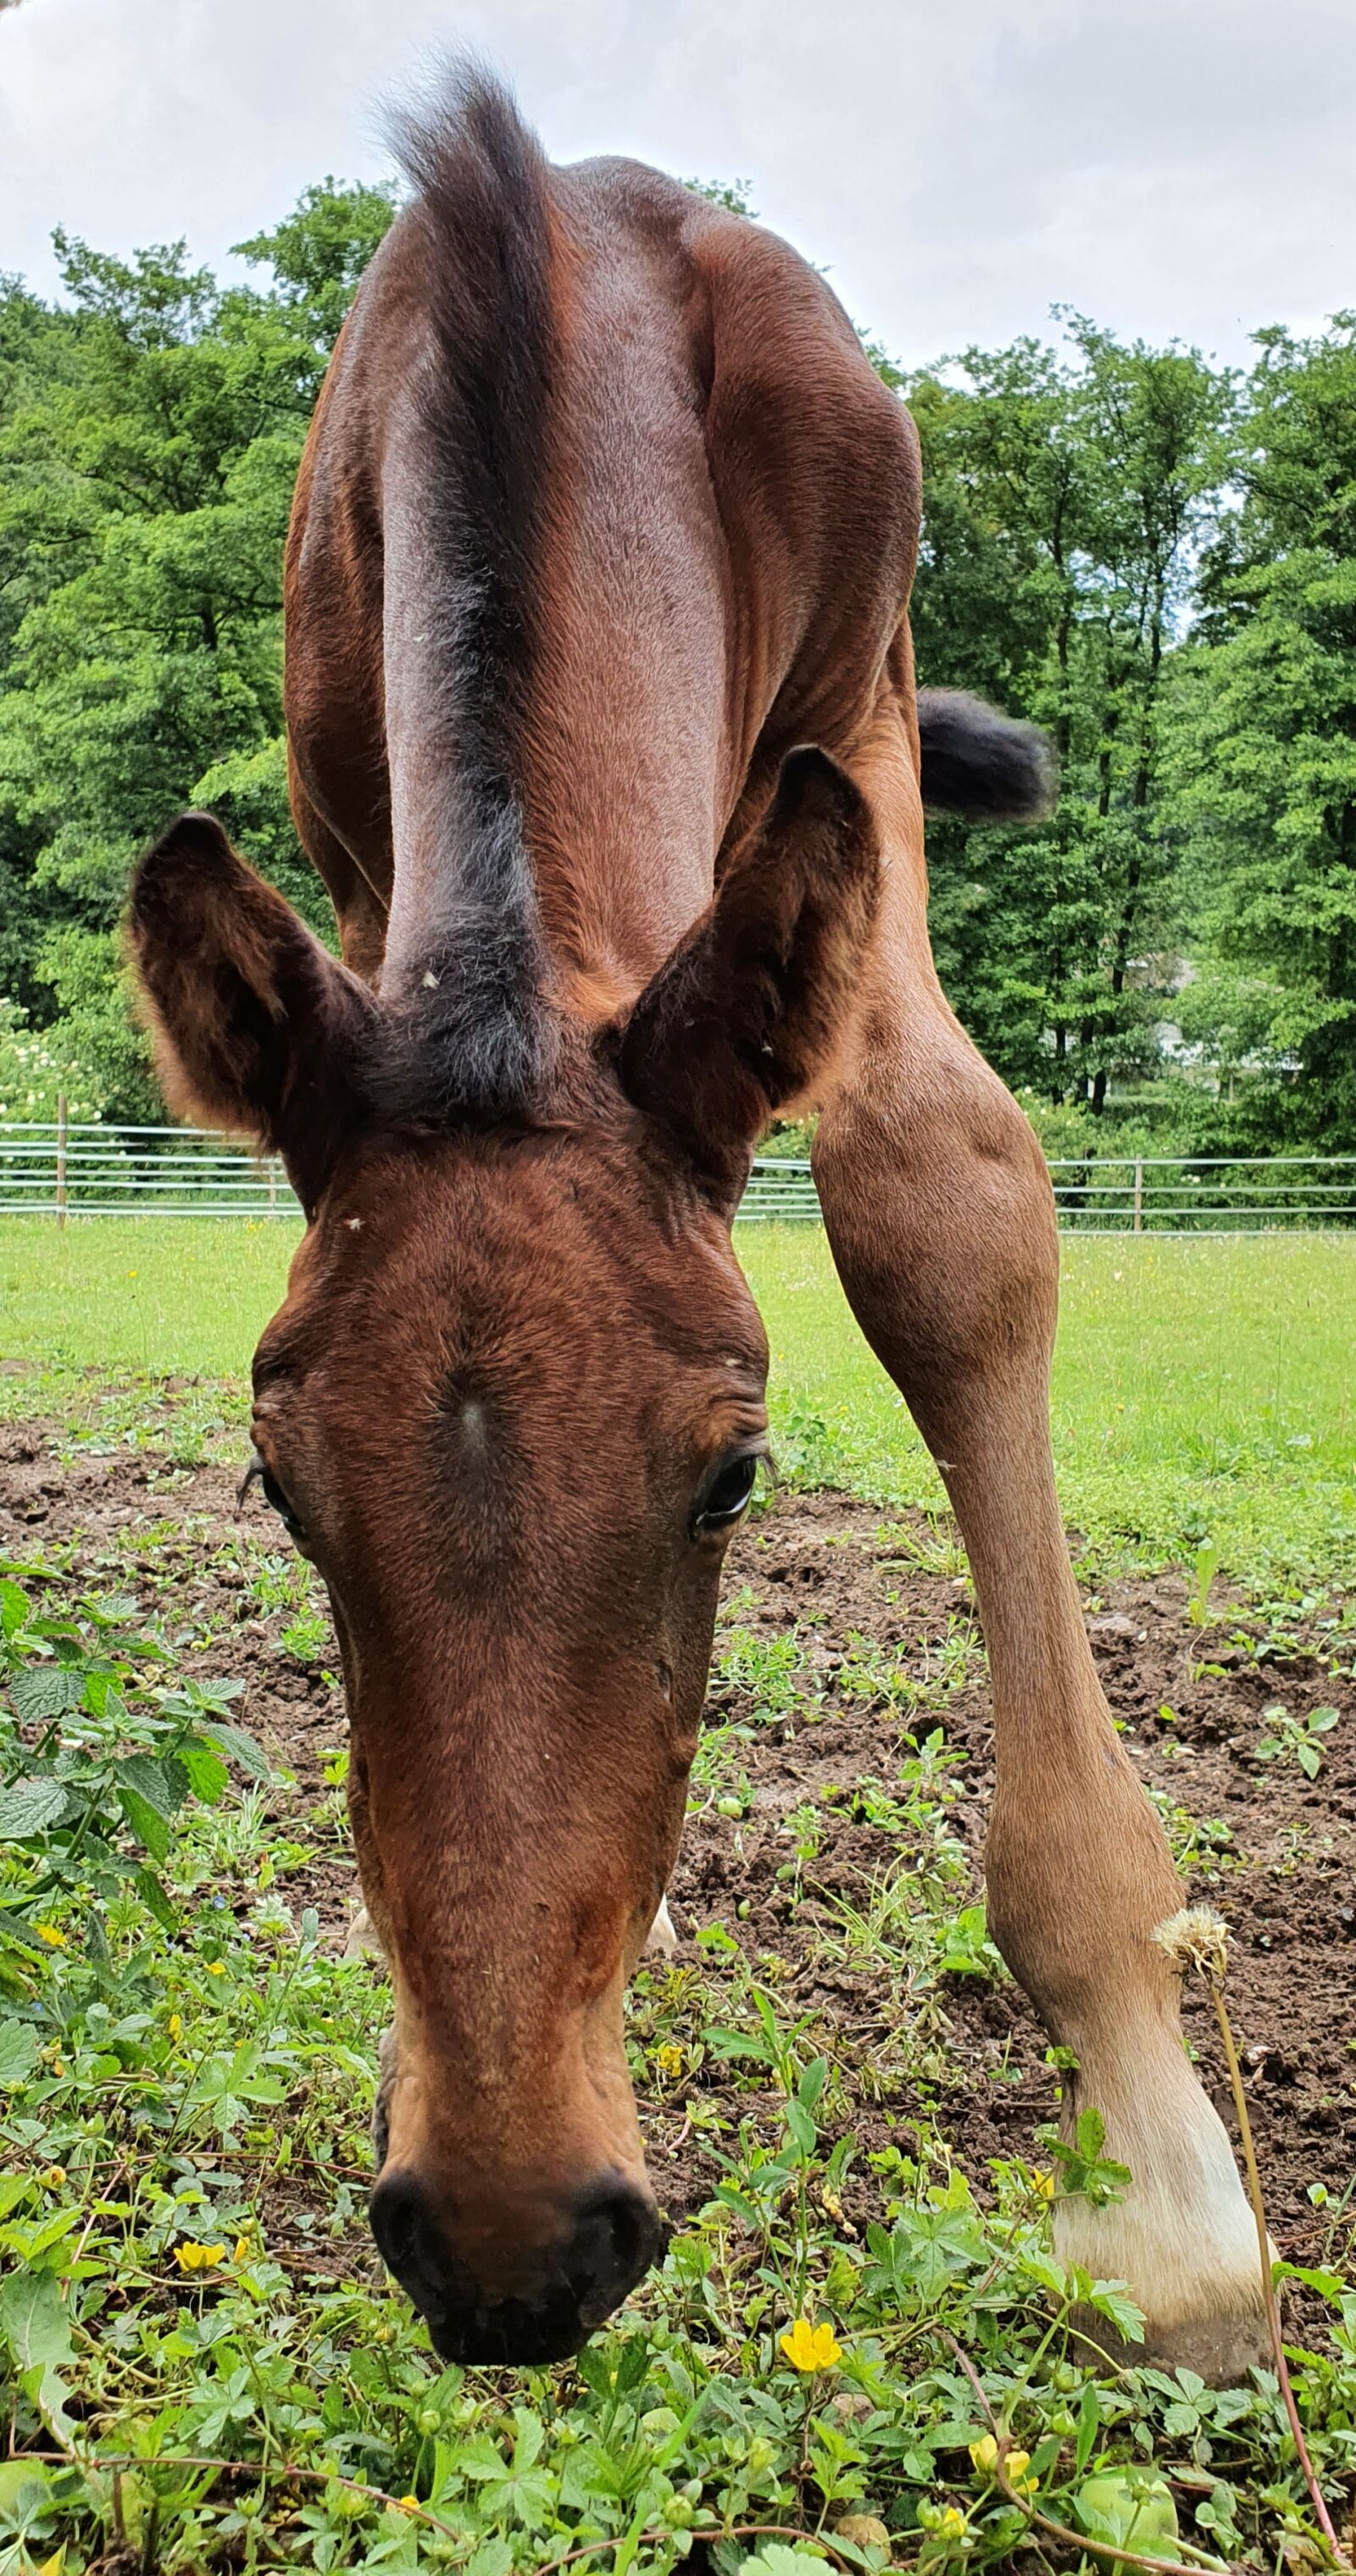 Samsung Galaxy S10+ sample photo. Foal, horse, close up photography